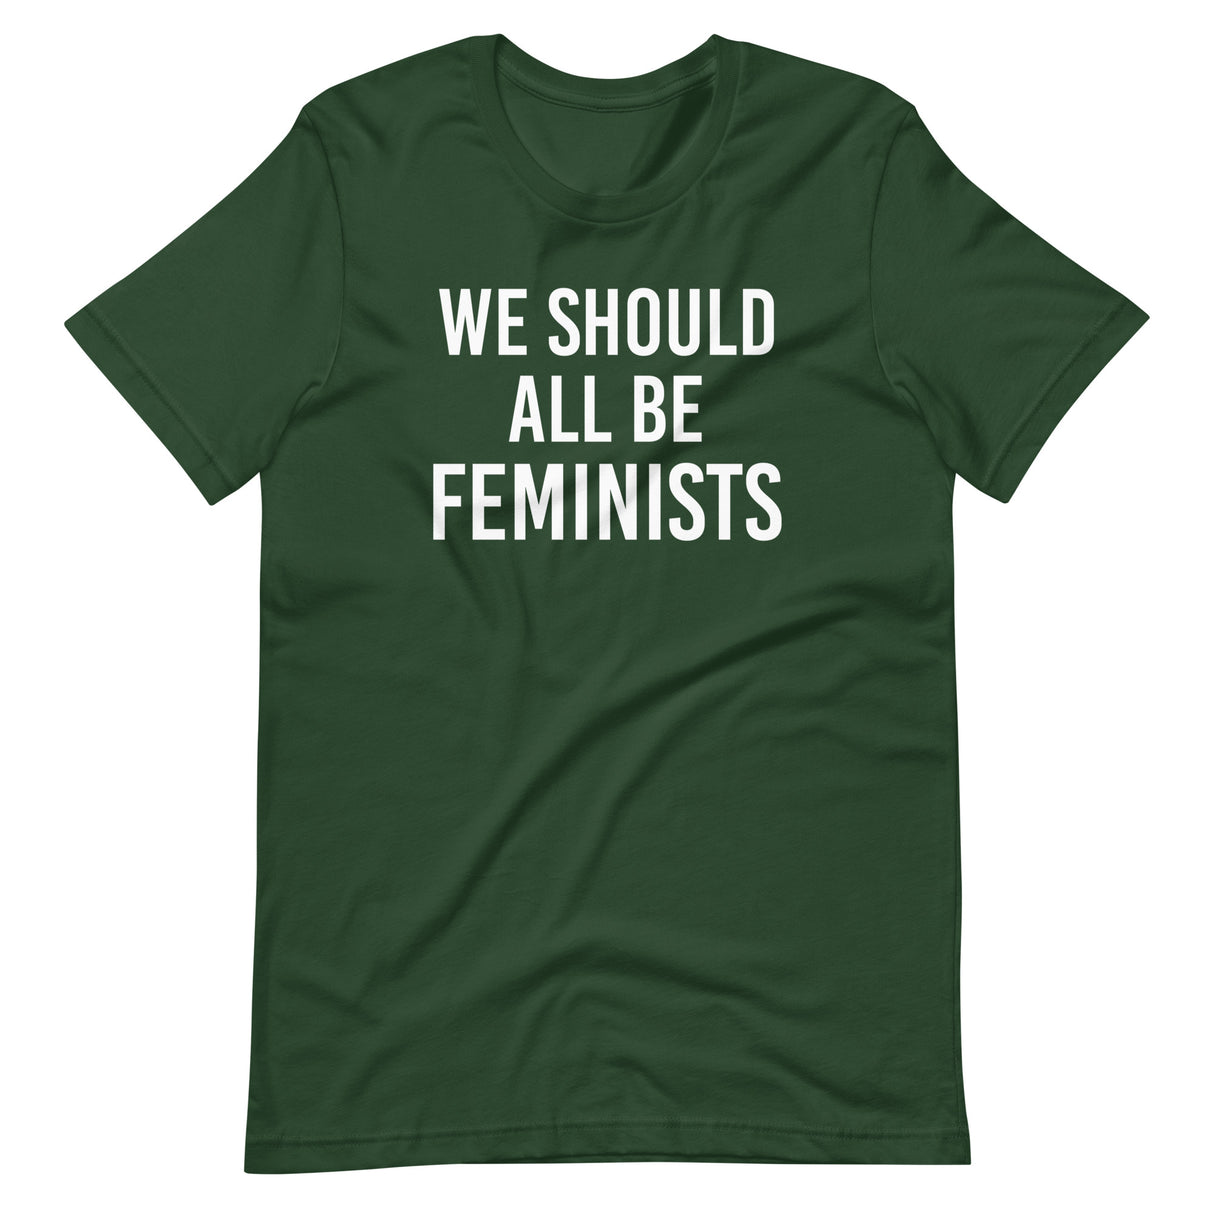 We Should All Be Feminists Shirt